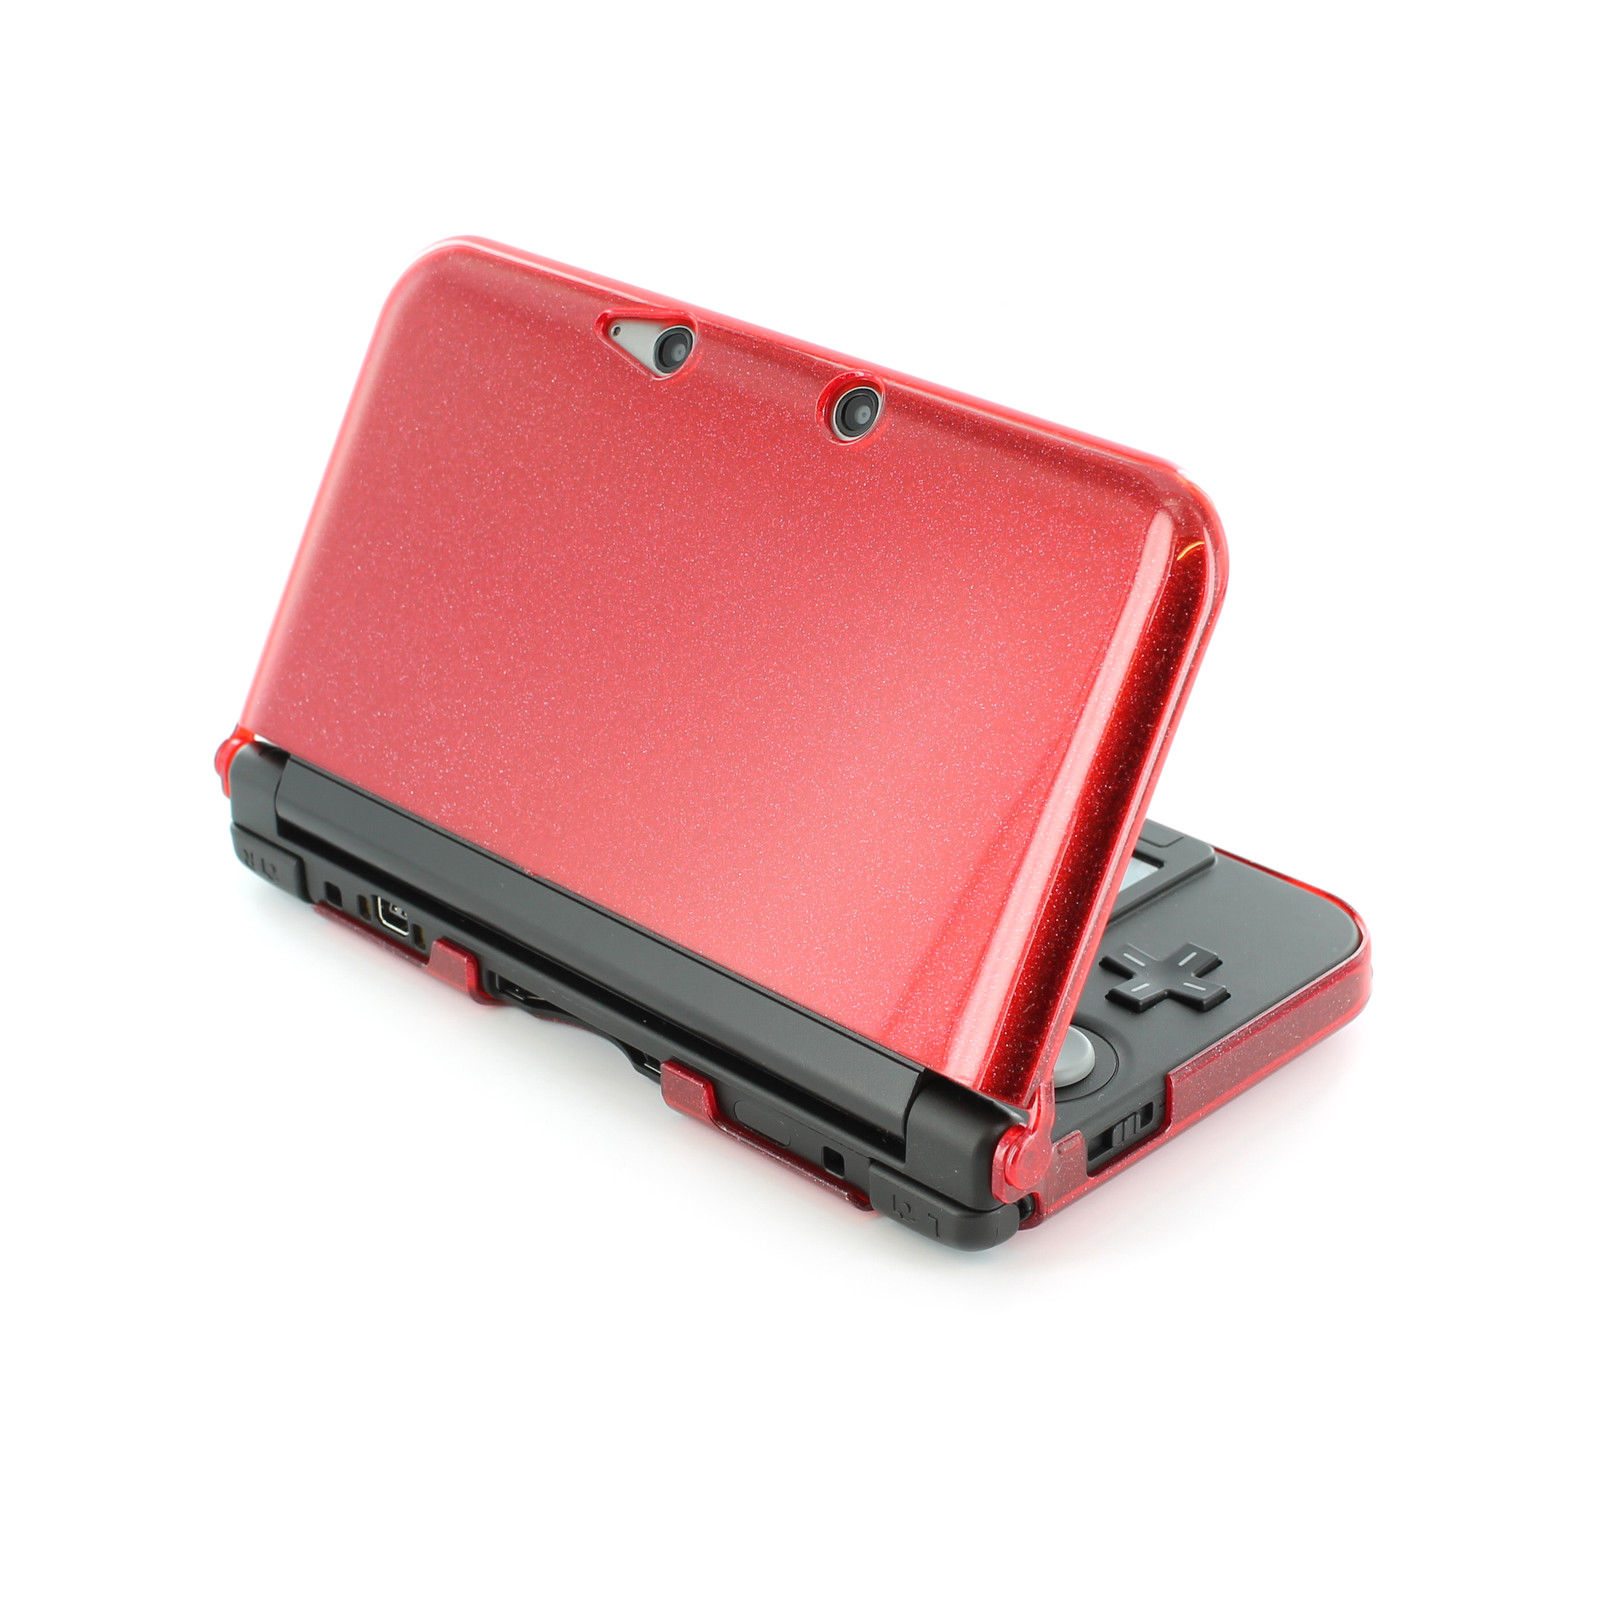 ZedLabz glitter crystal hard protective case cover skin Nintendo 3DS XL LL Red 5060276722858